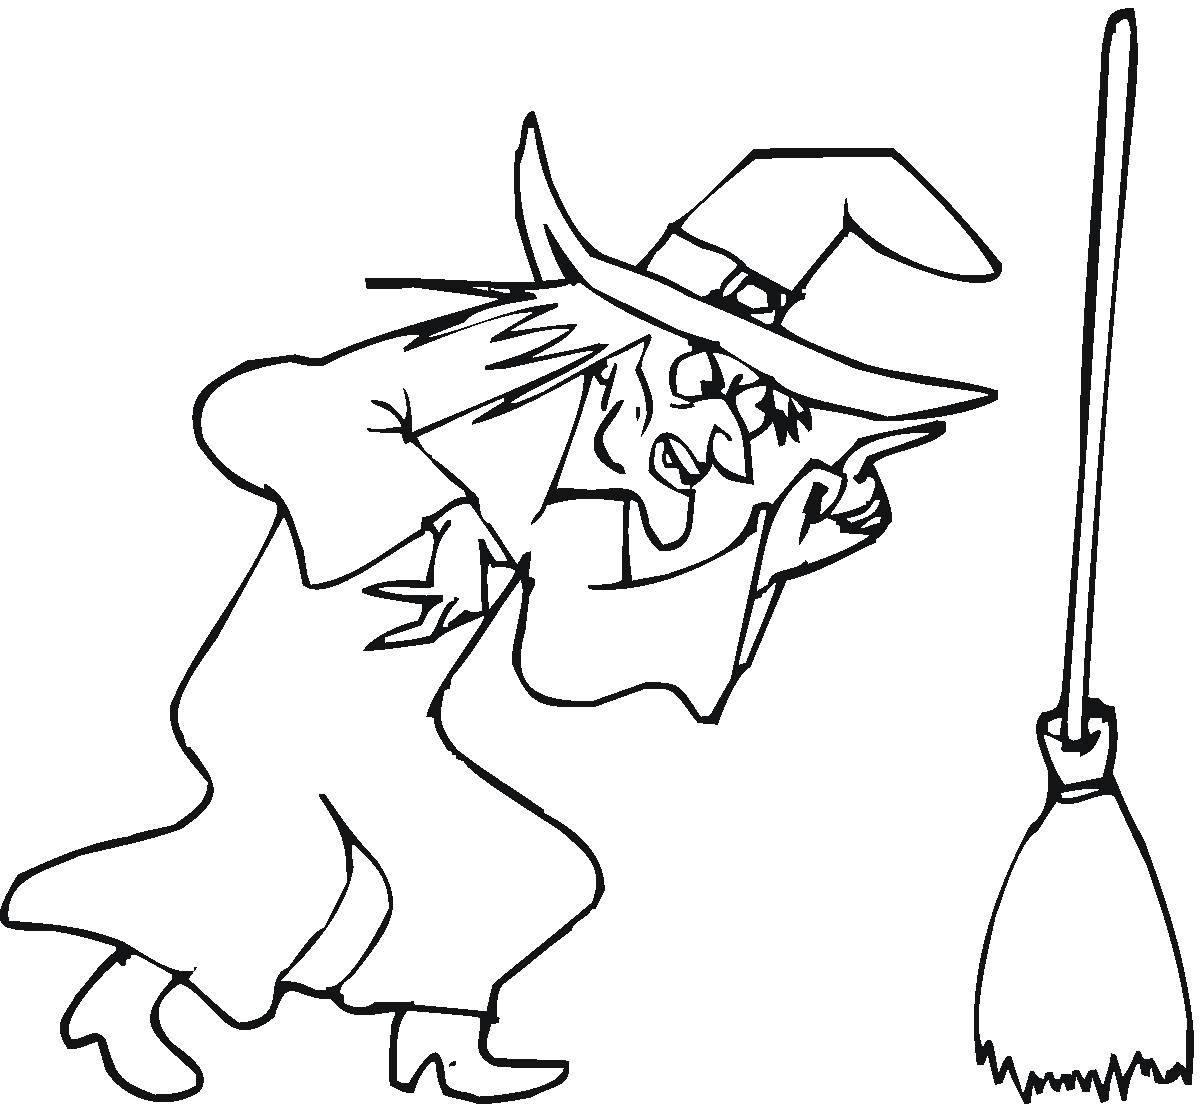 Coloring The witch found the broom. Category witch. Tags:  witch, Halloween.